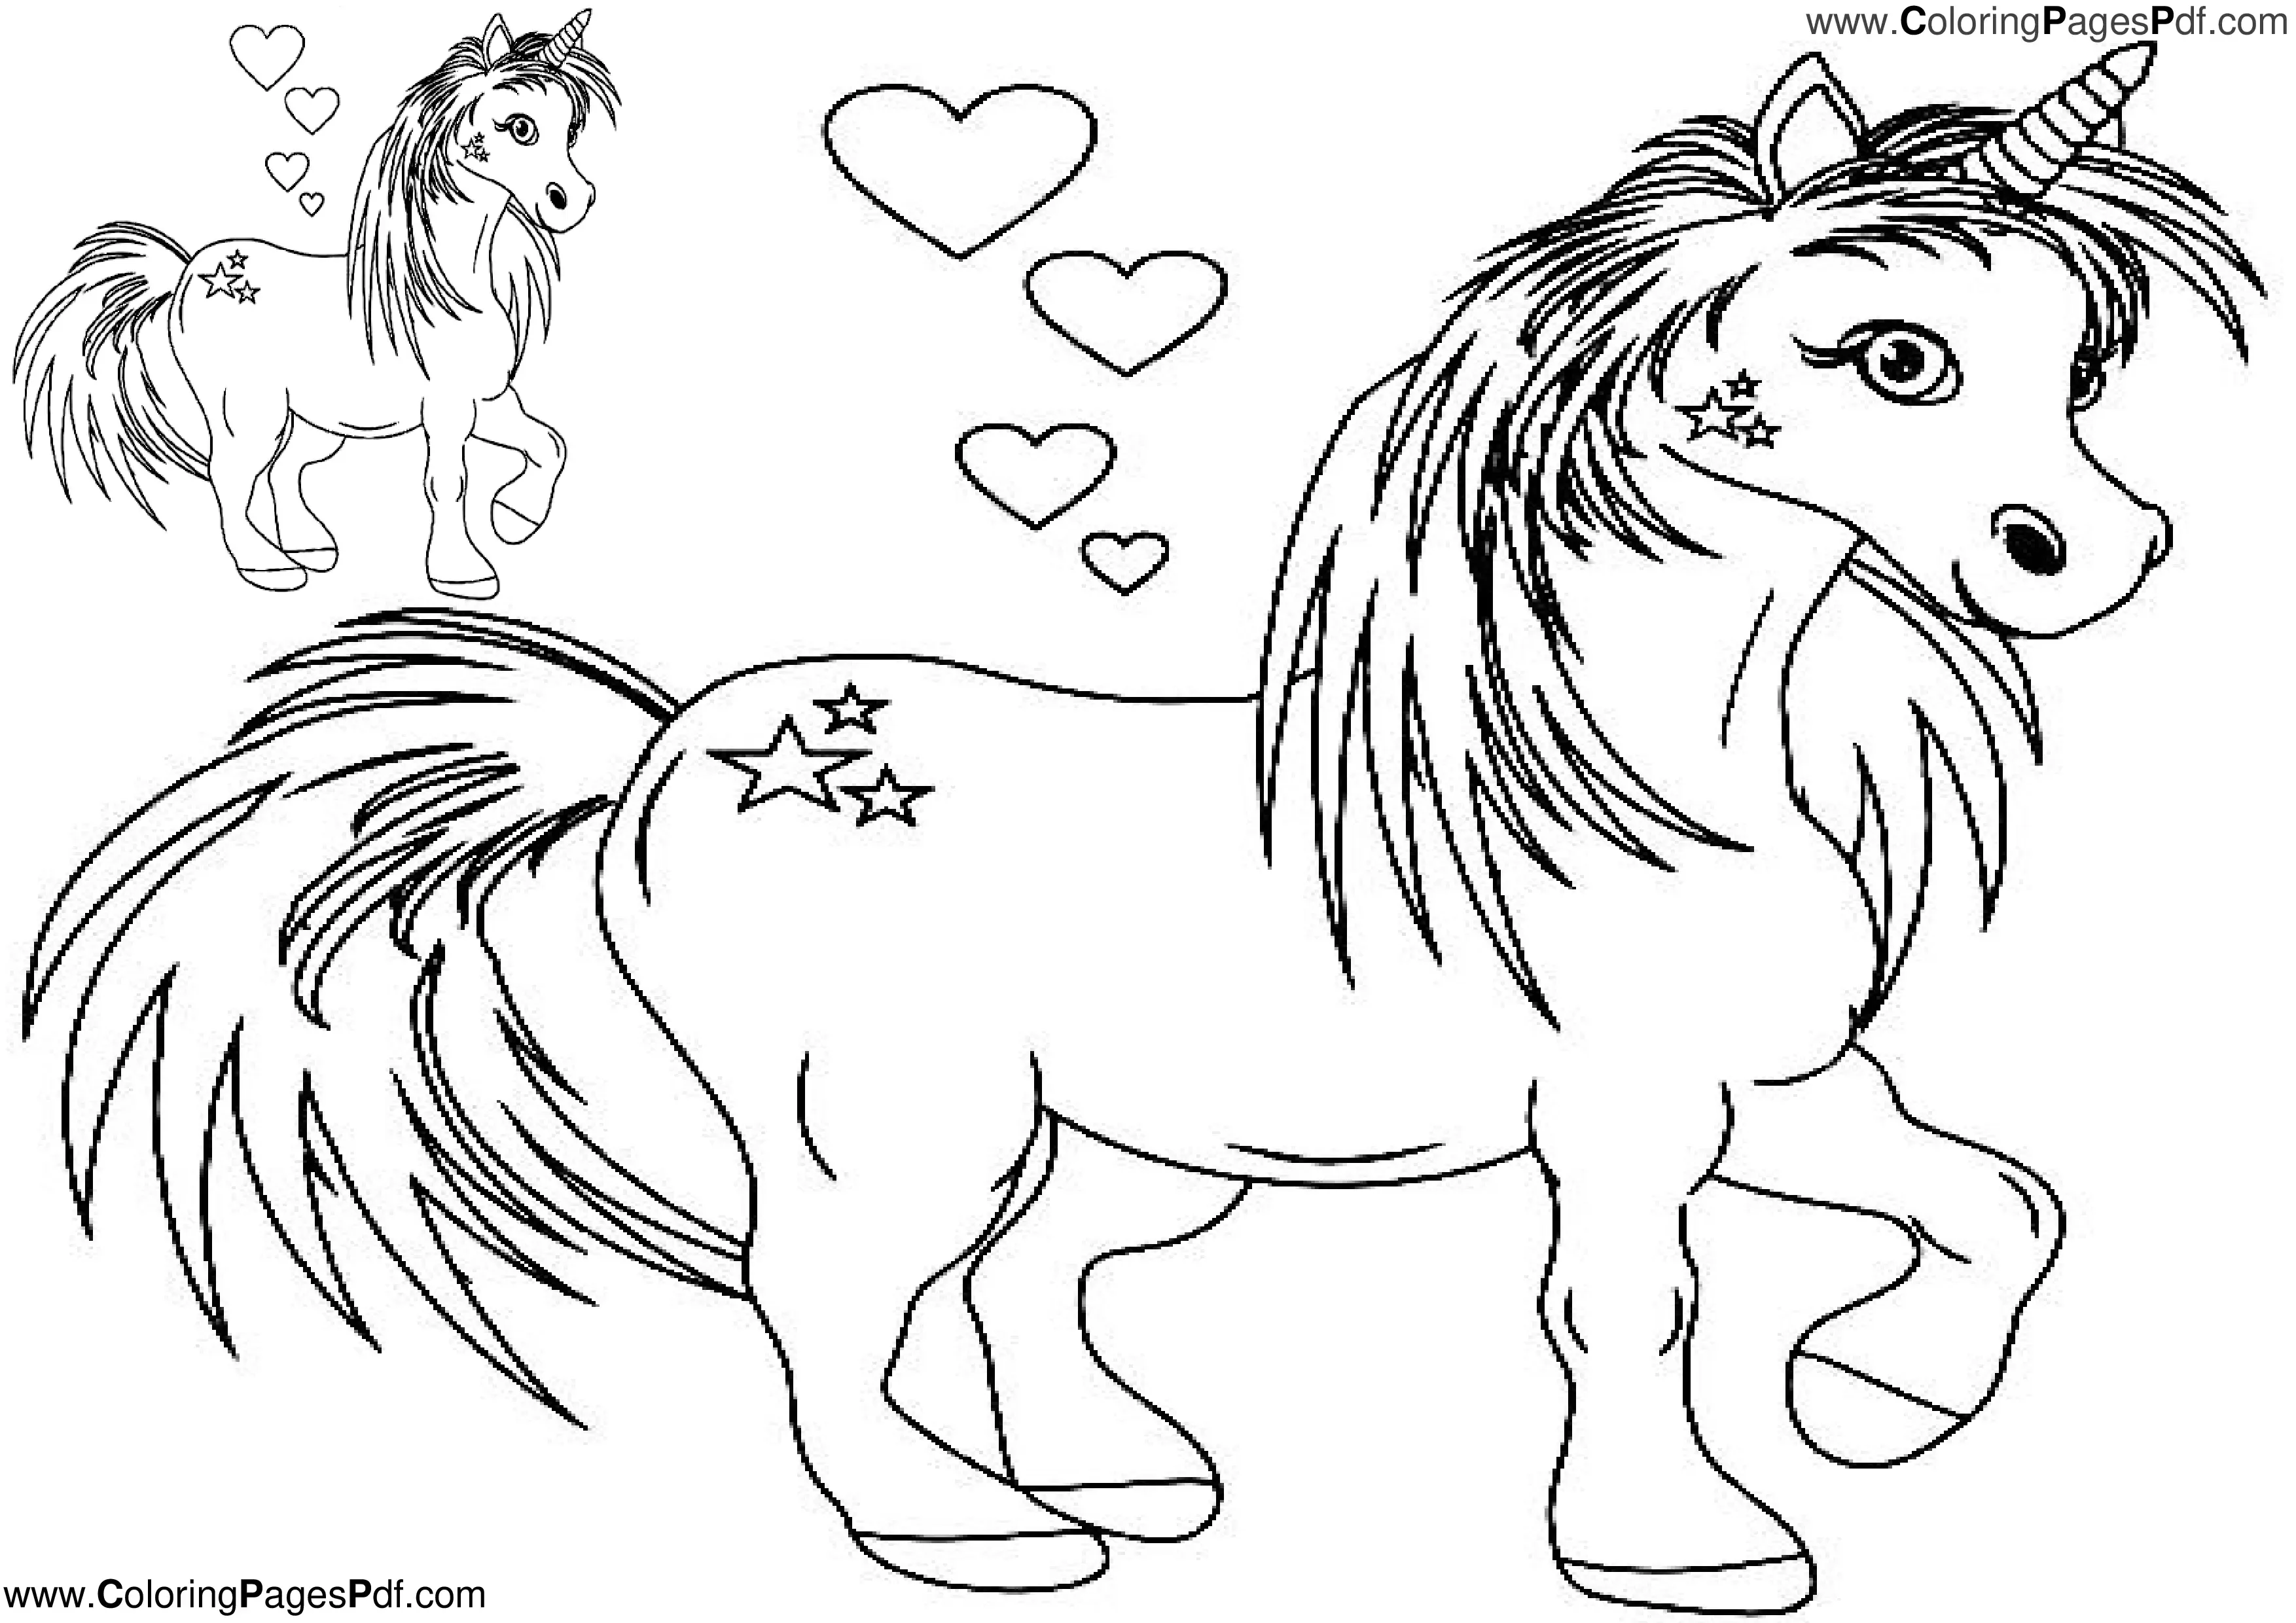 Printable Cute unicorn coloring pages